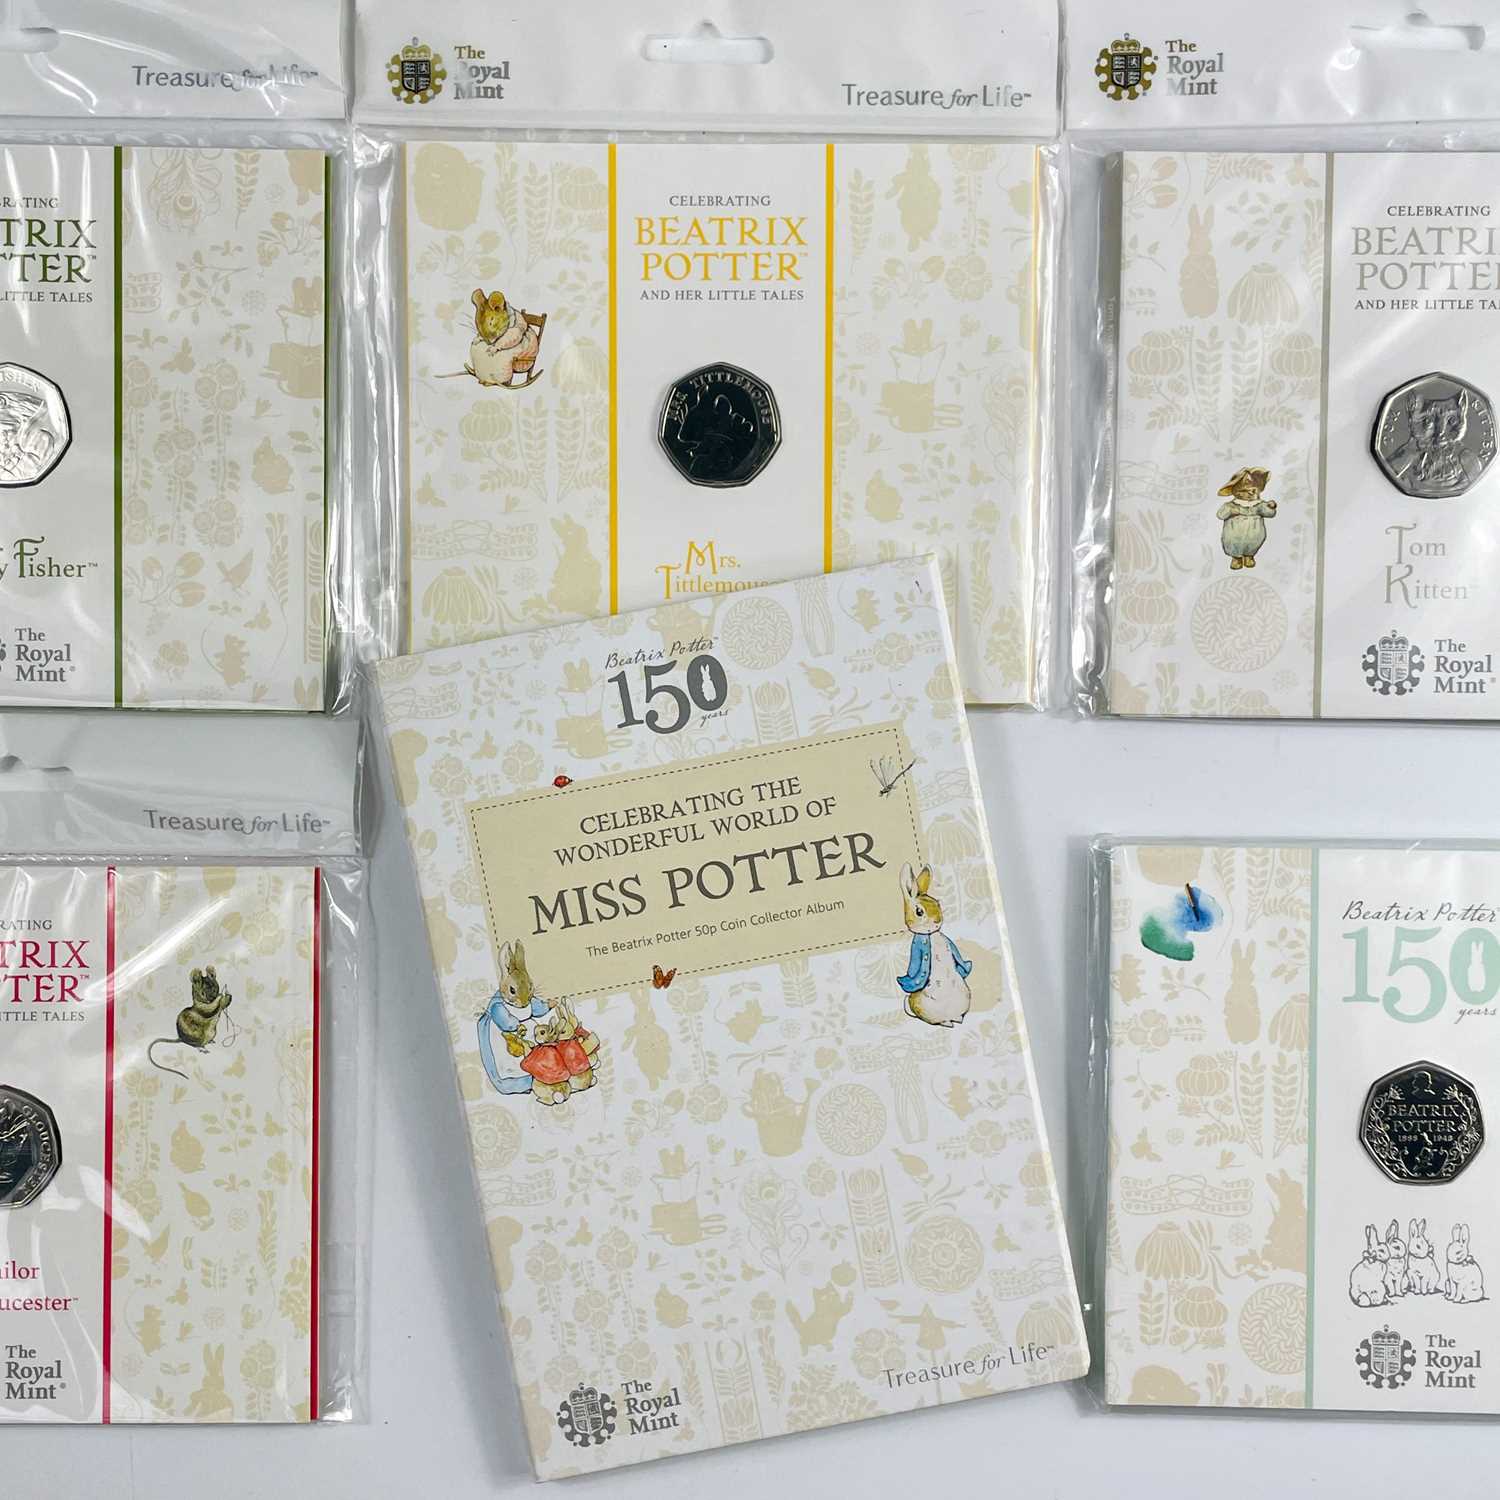 UK 50 pence Uncirculated Beatrix Potter coins in Royal Mint packaging (x11) - Image 2 of 5